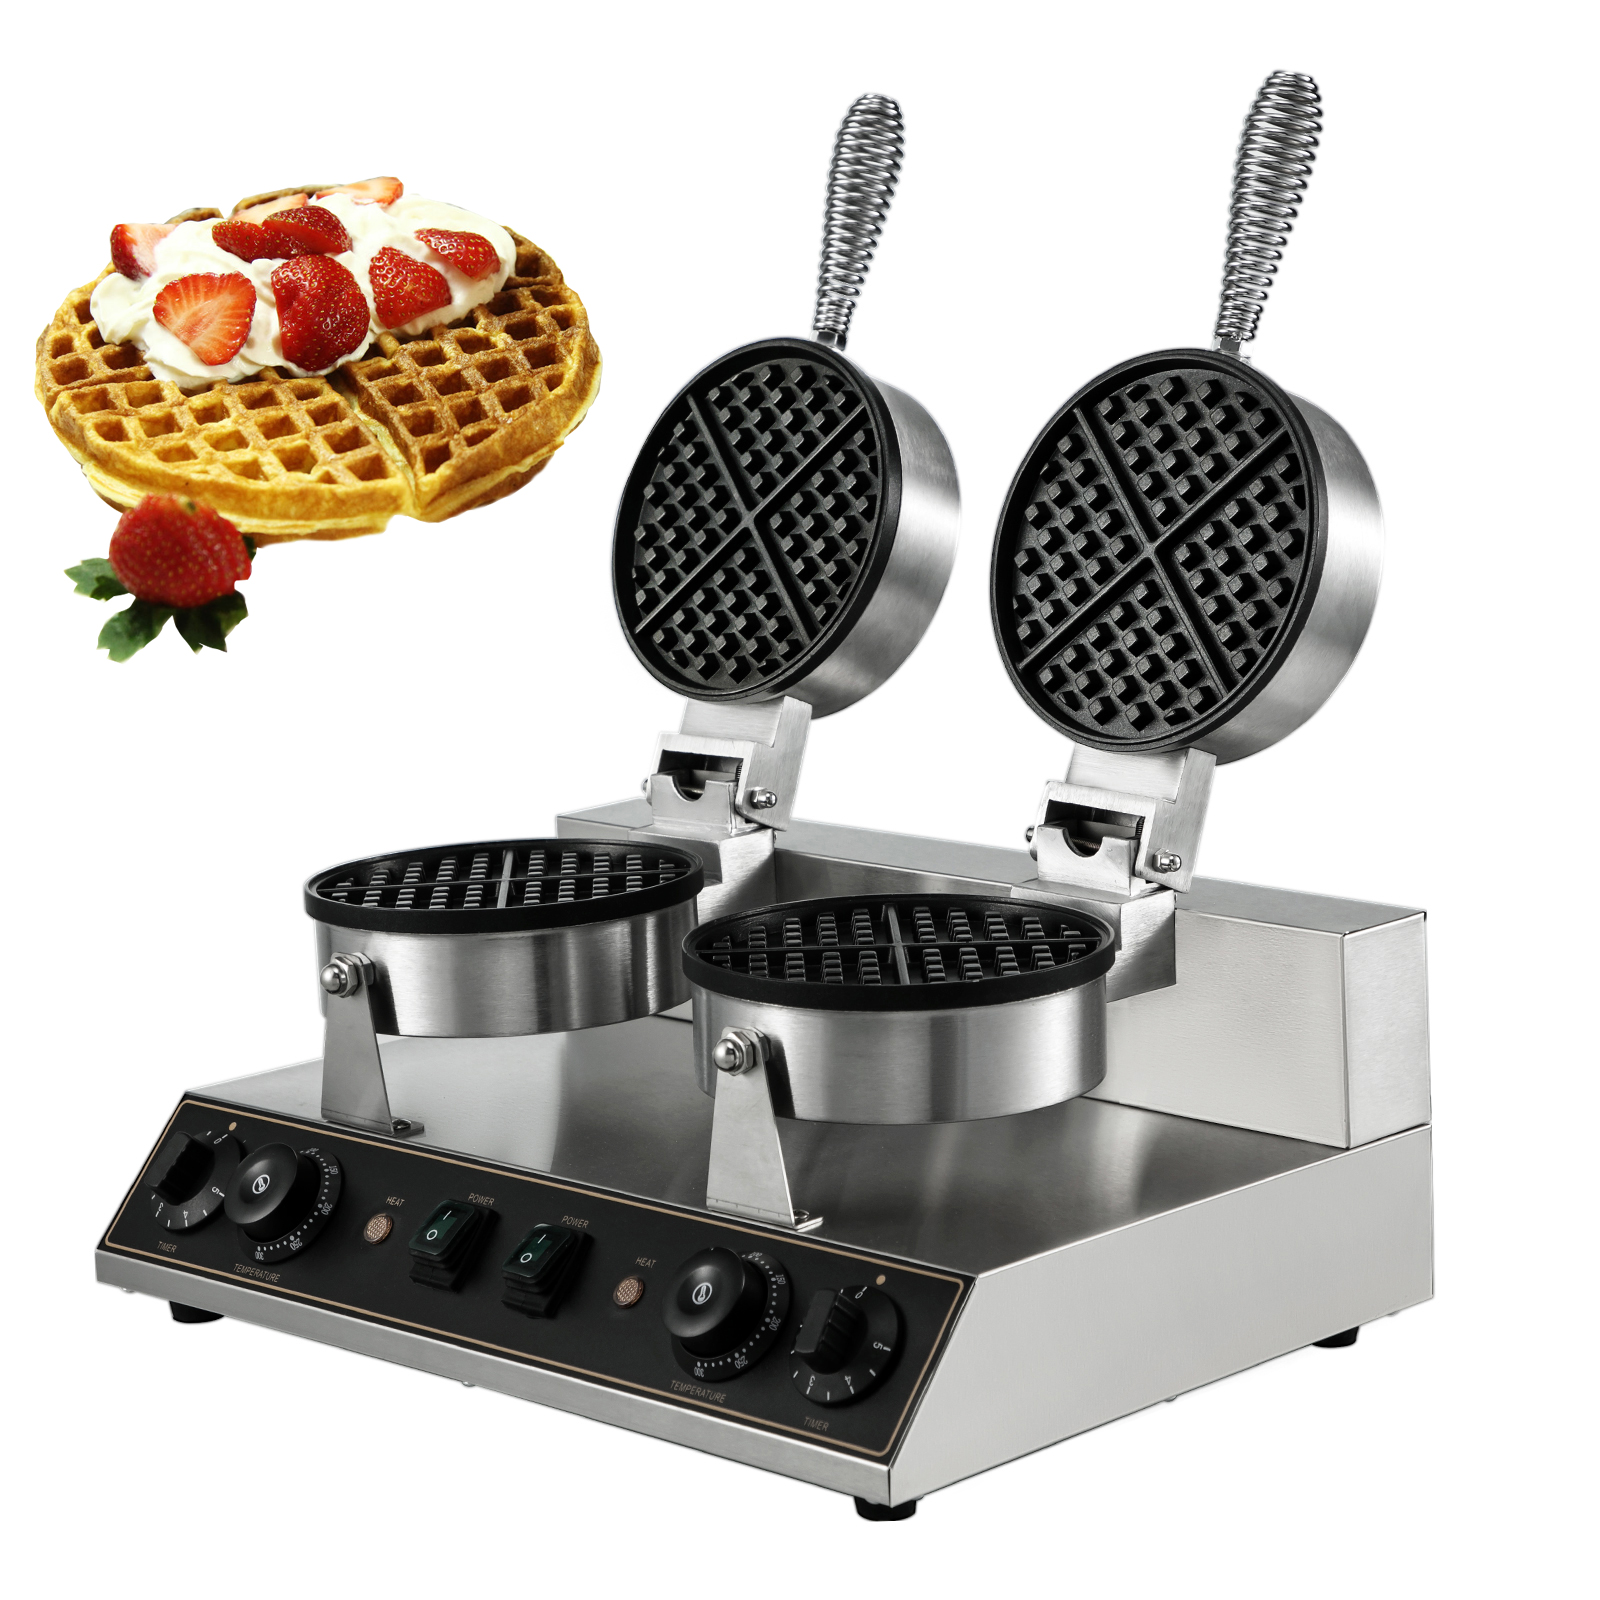 Adjustable Temperature Control Stainless Steel Mould For Pancakes Cookies Non-Stick Coating Waffle Maker Iron Machine Household Mini Waffle Maker Electric Cake Maker Deep Cooking Plates 